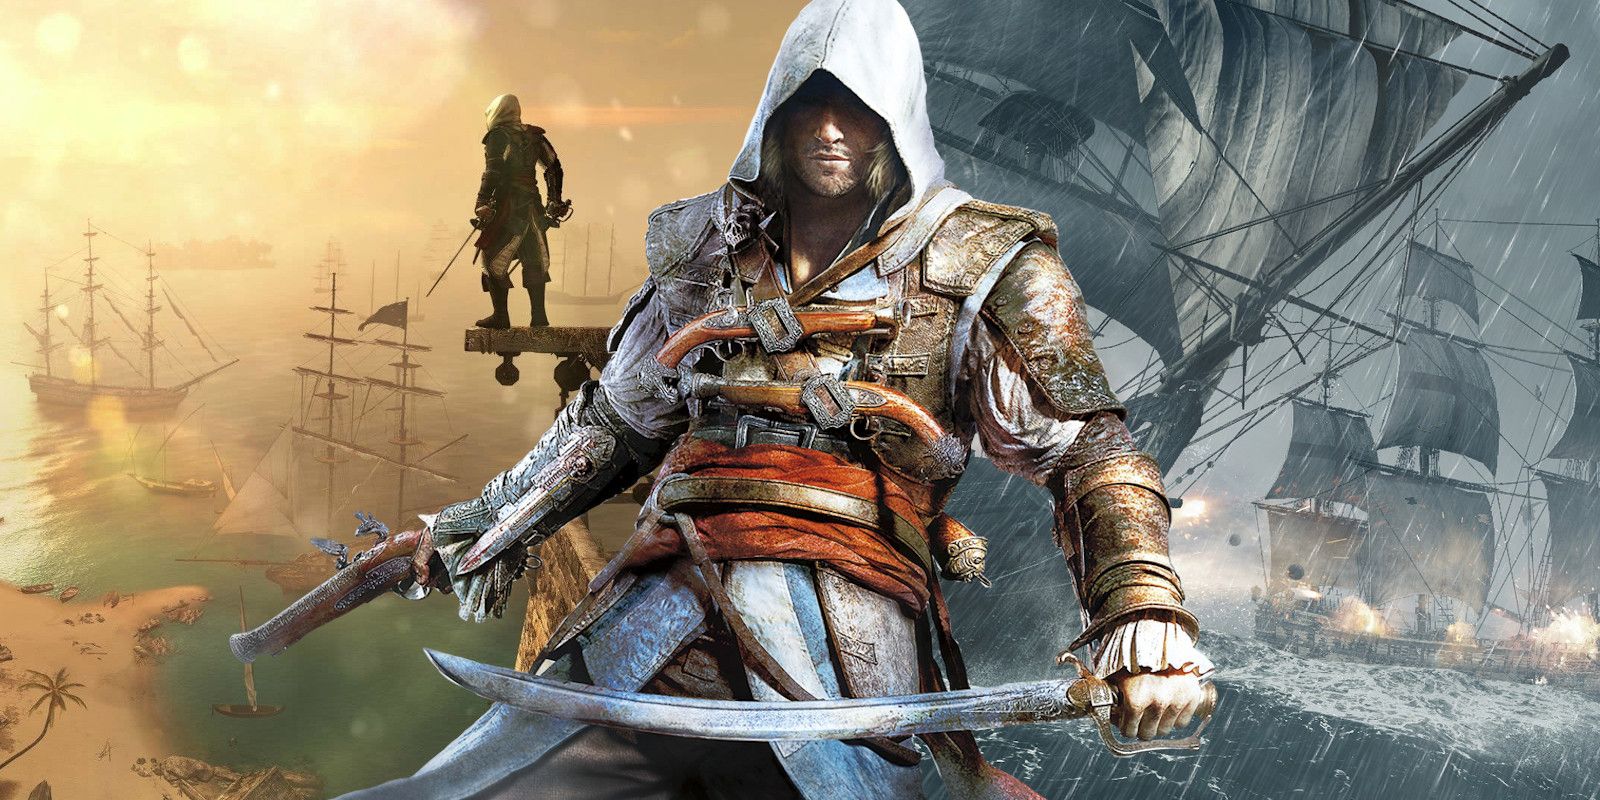 Edward Kenway and pirate ships from Assassin's Creed IV: Black Flag